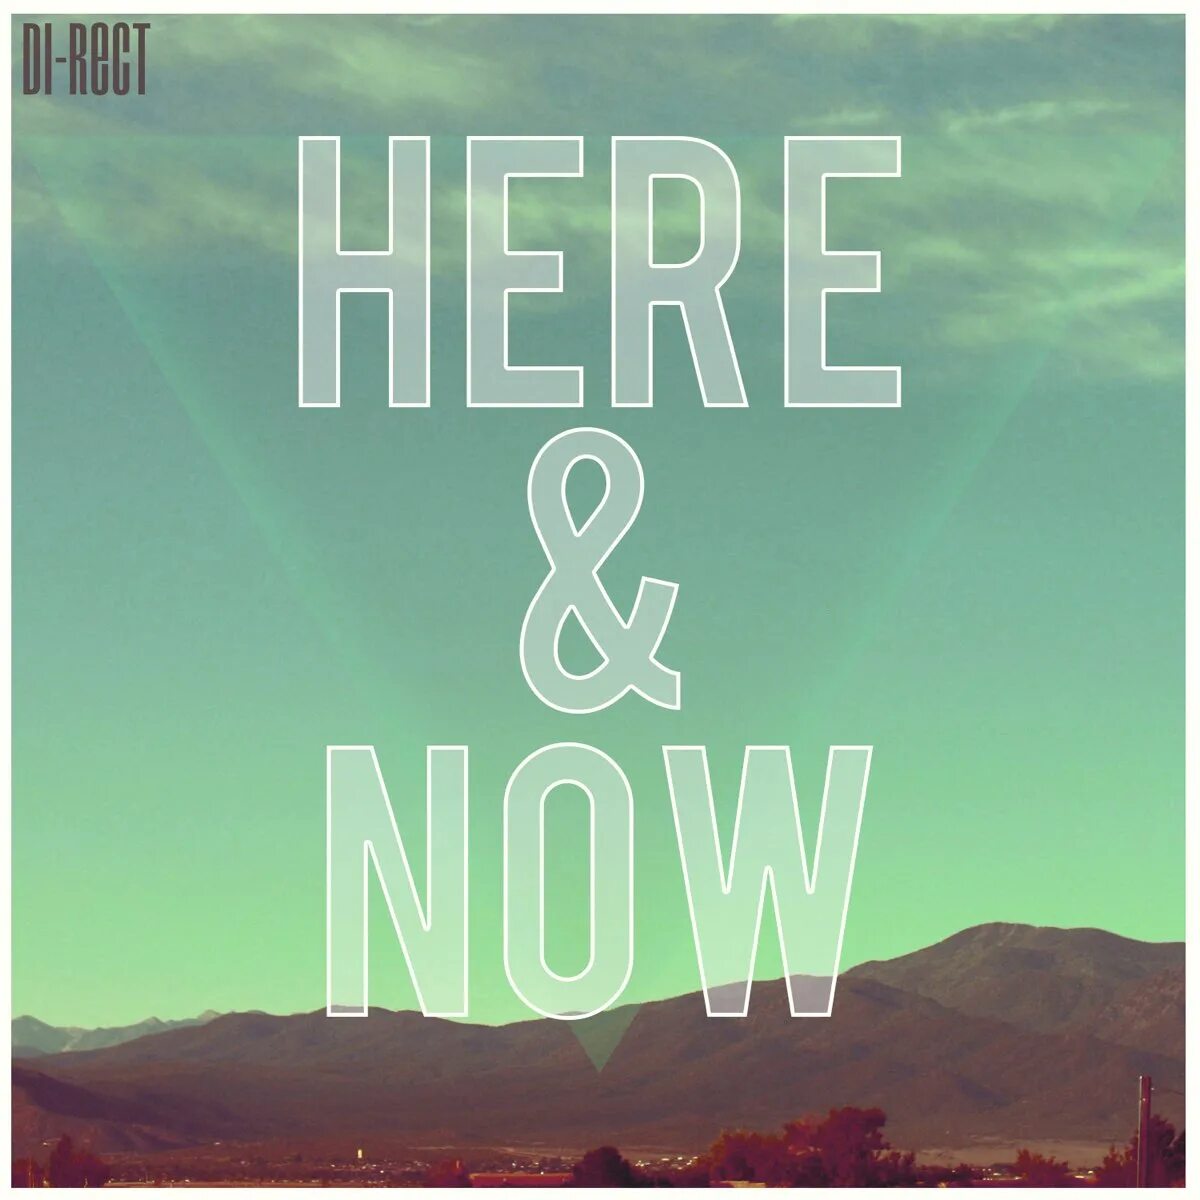 Here and Now. Here песня. Live here Now на аватар. Here and Now наклейка. Песня here now